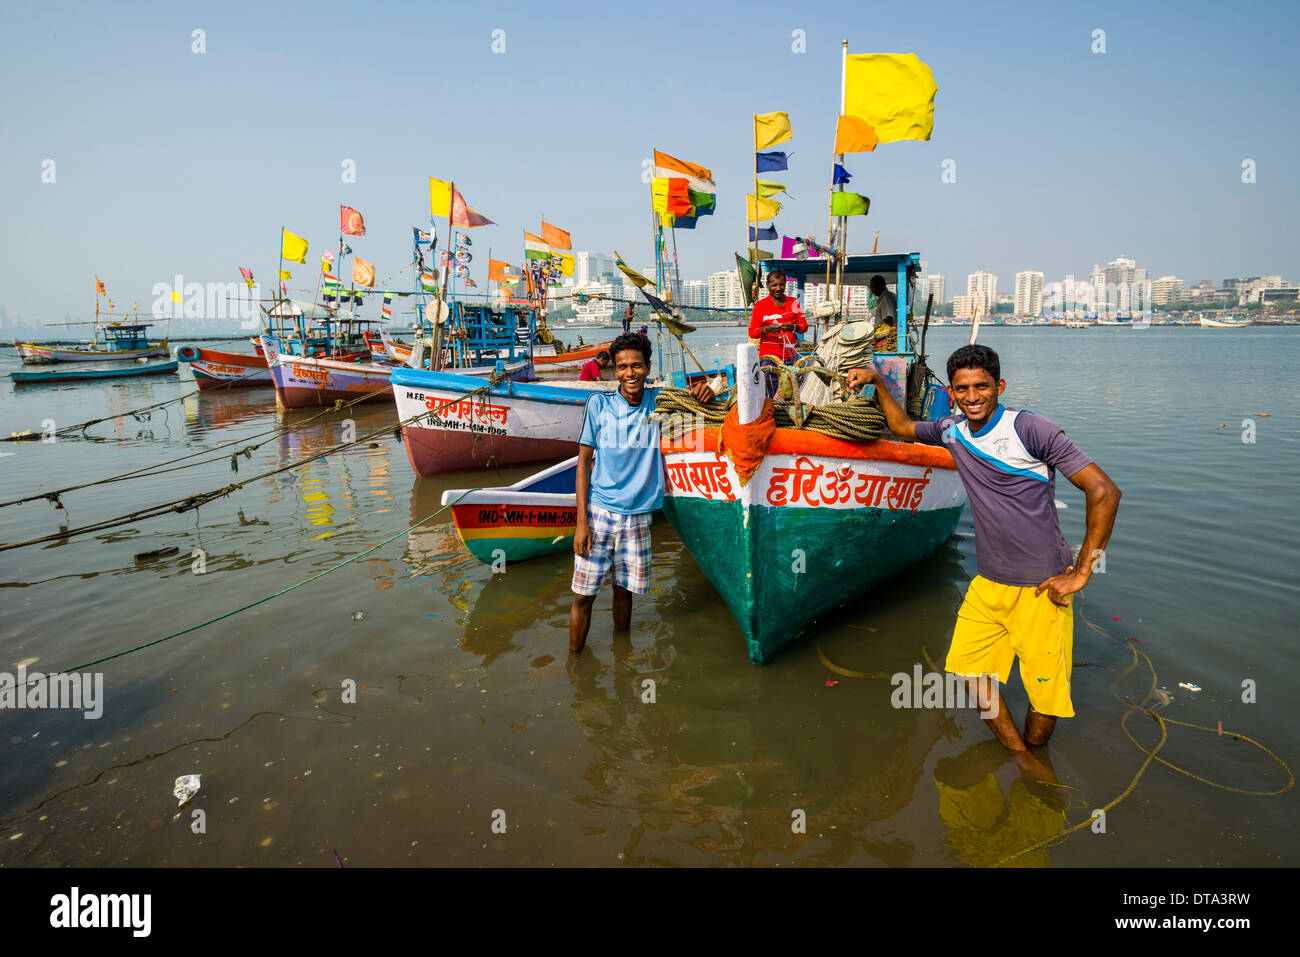 Two fishermen and some fishing boats in front of the skyline of the suburb Churchgate seen across the Back Bay, Mumbai Stock Photo